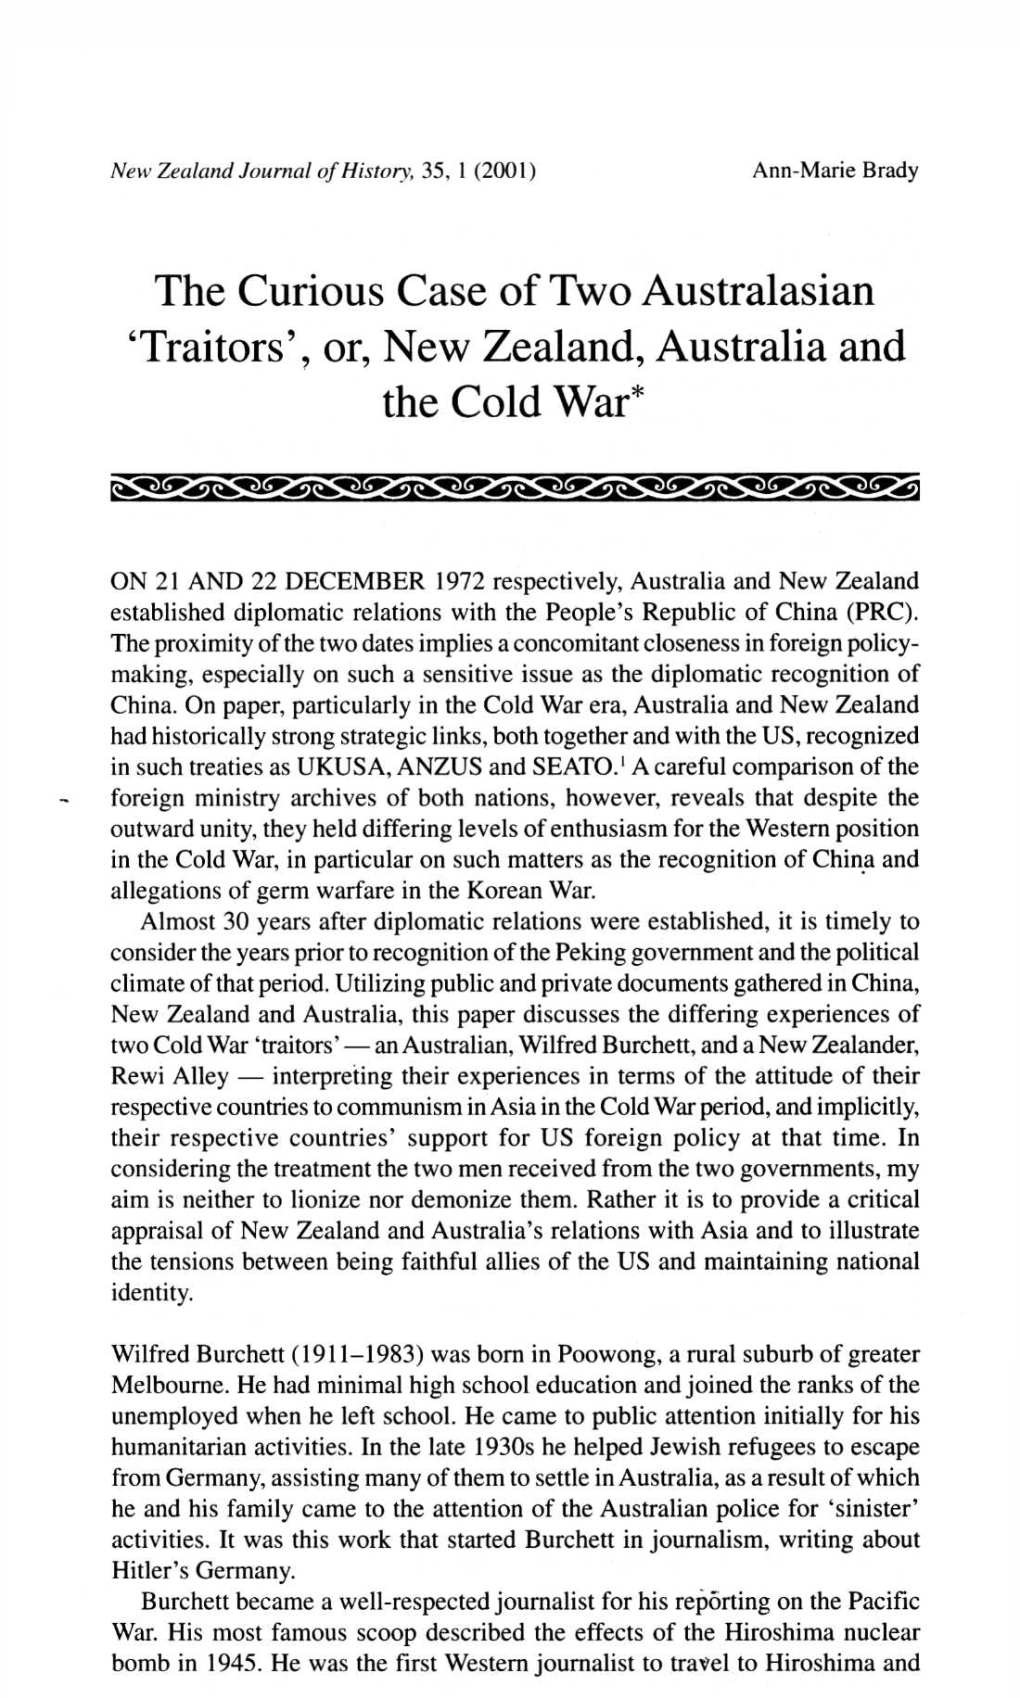 The Curious Case of Two Australasian 'Traitors', Or, New Zealand, Australia and the Cold War*